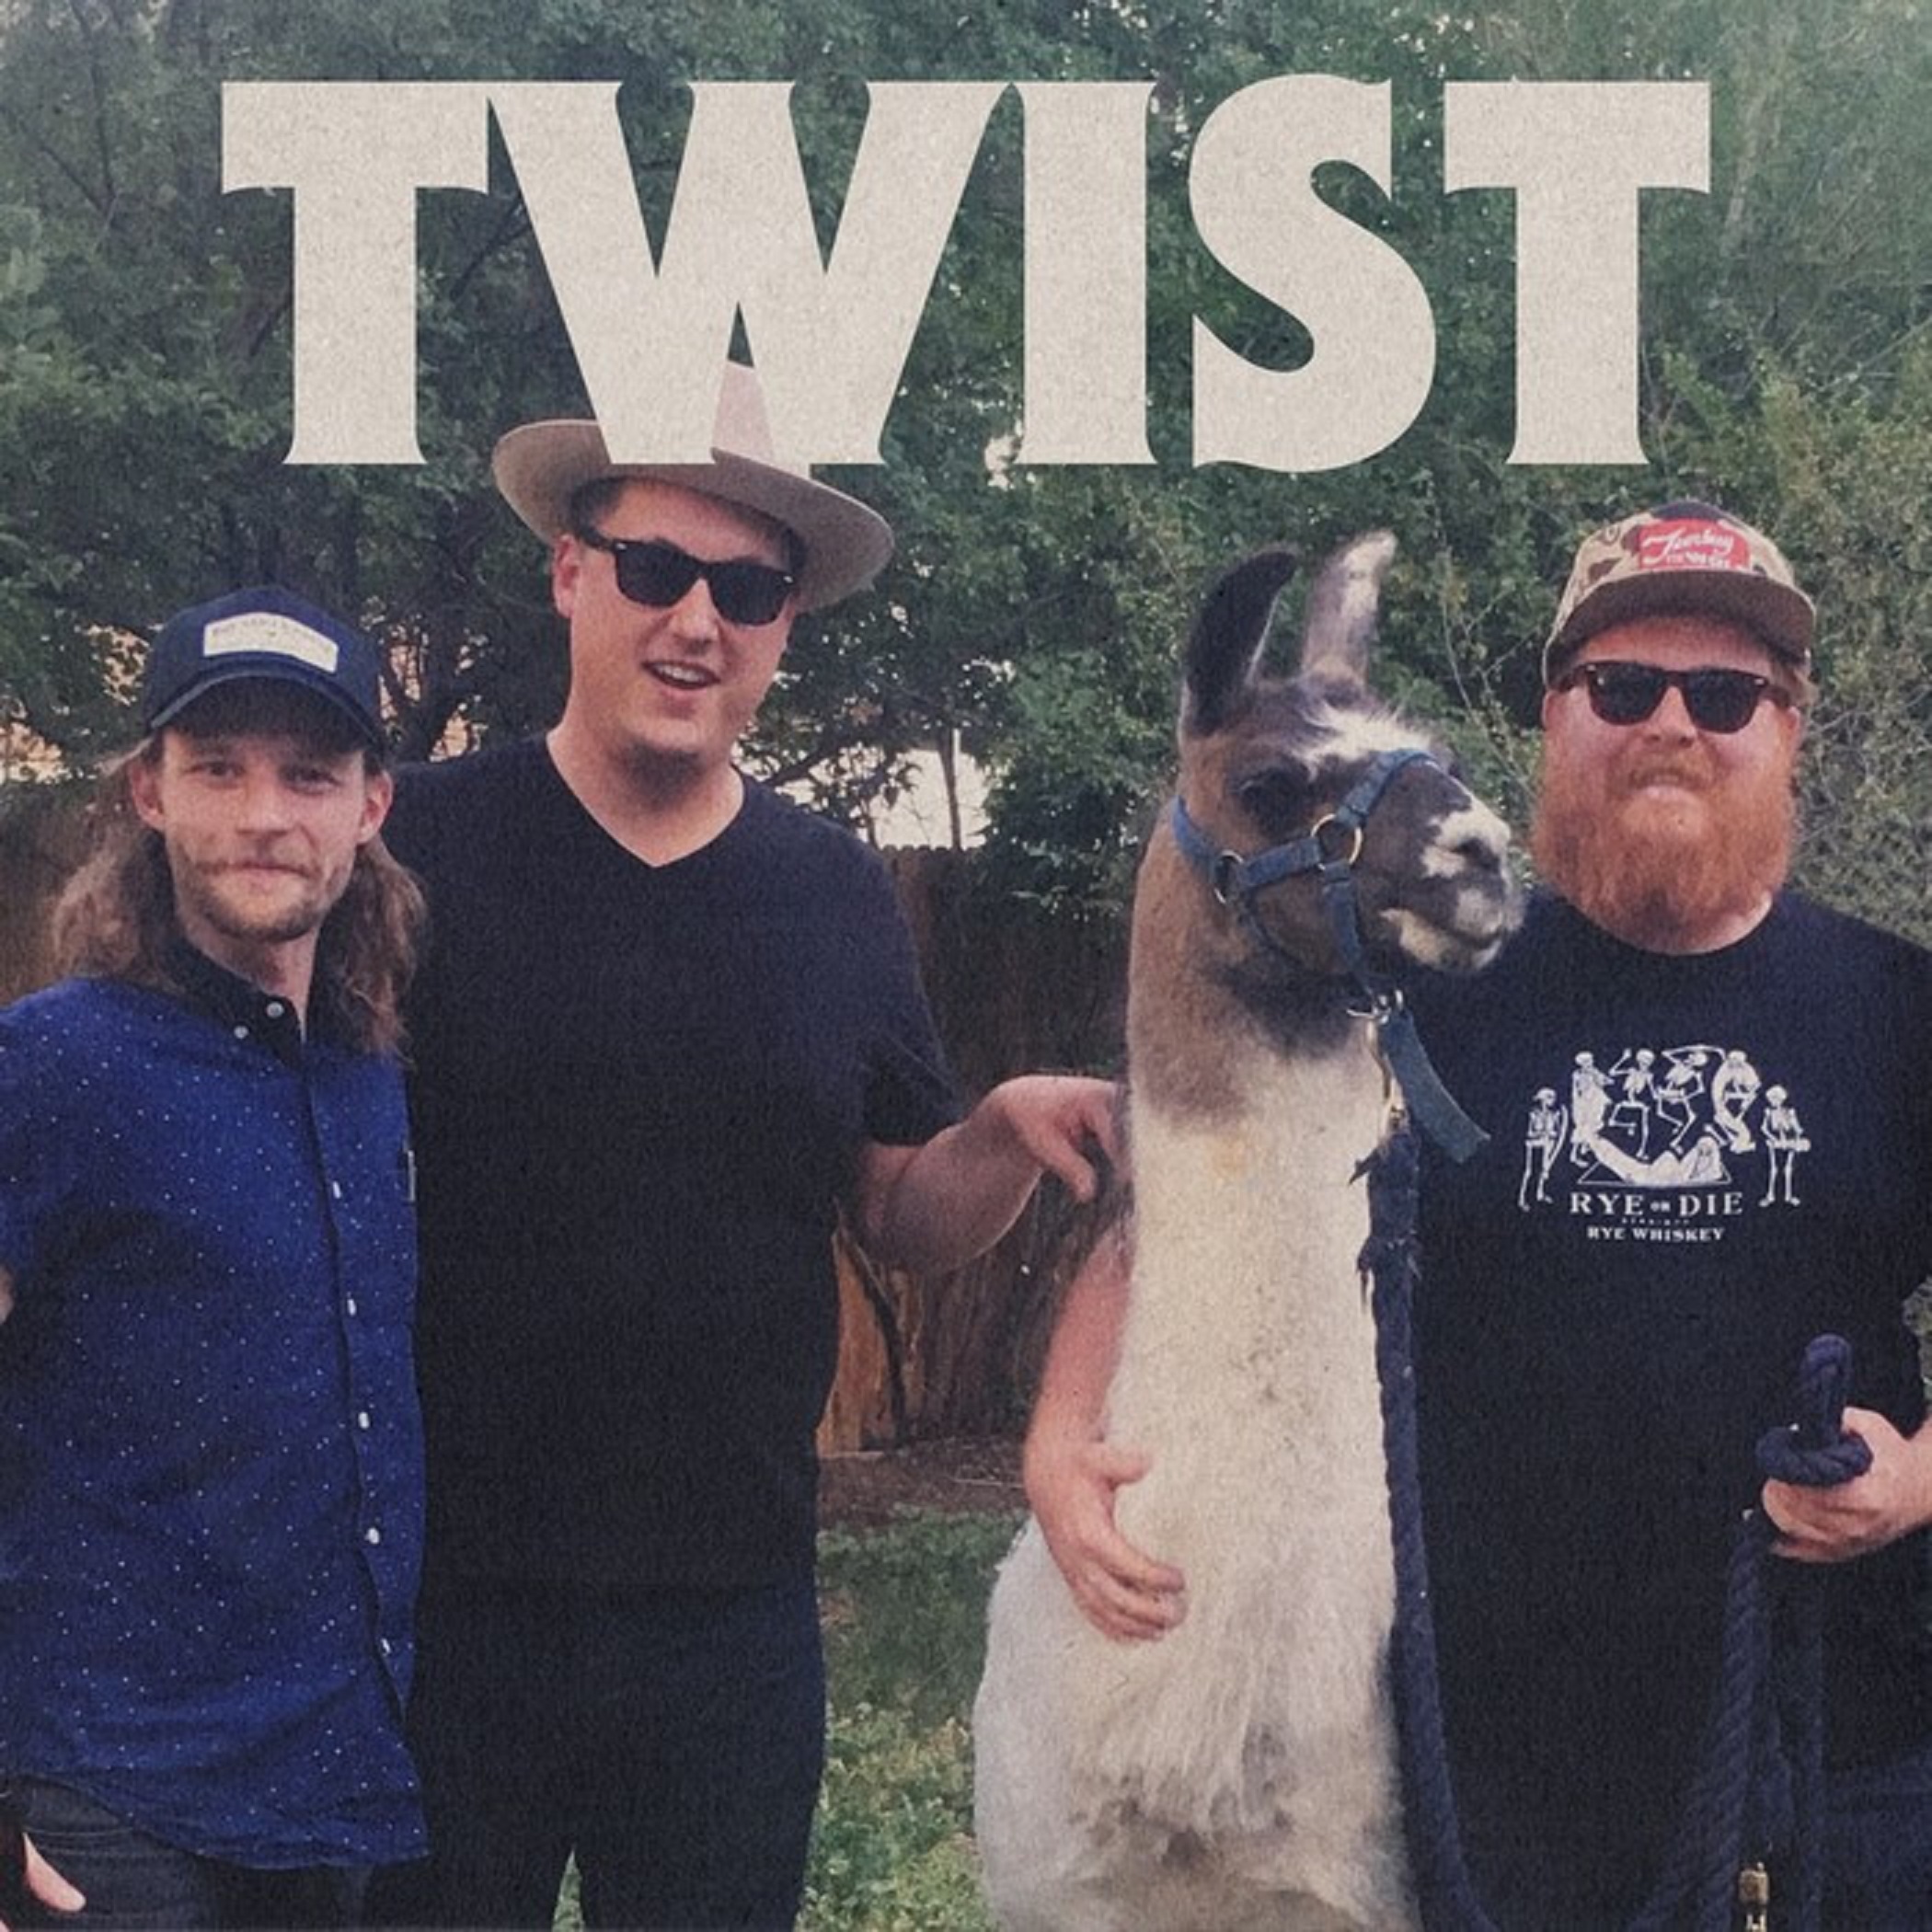 THE GHOST OF PAUL REVERE UNVEIL NEW SINGLE “TWIST,” AN UNRELEASED BONUS TRACK TO COMMEMORATE 10TH ANNIVERSARY OF THEIR PIVOTAL ALBUM ‘BELIEVE’